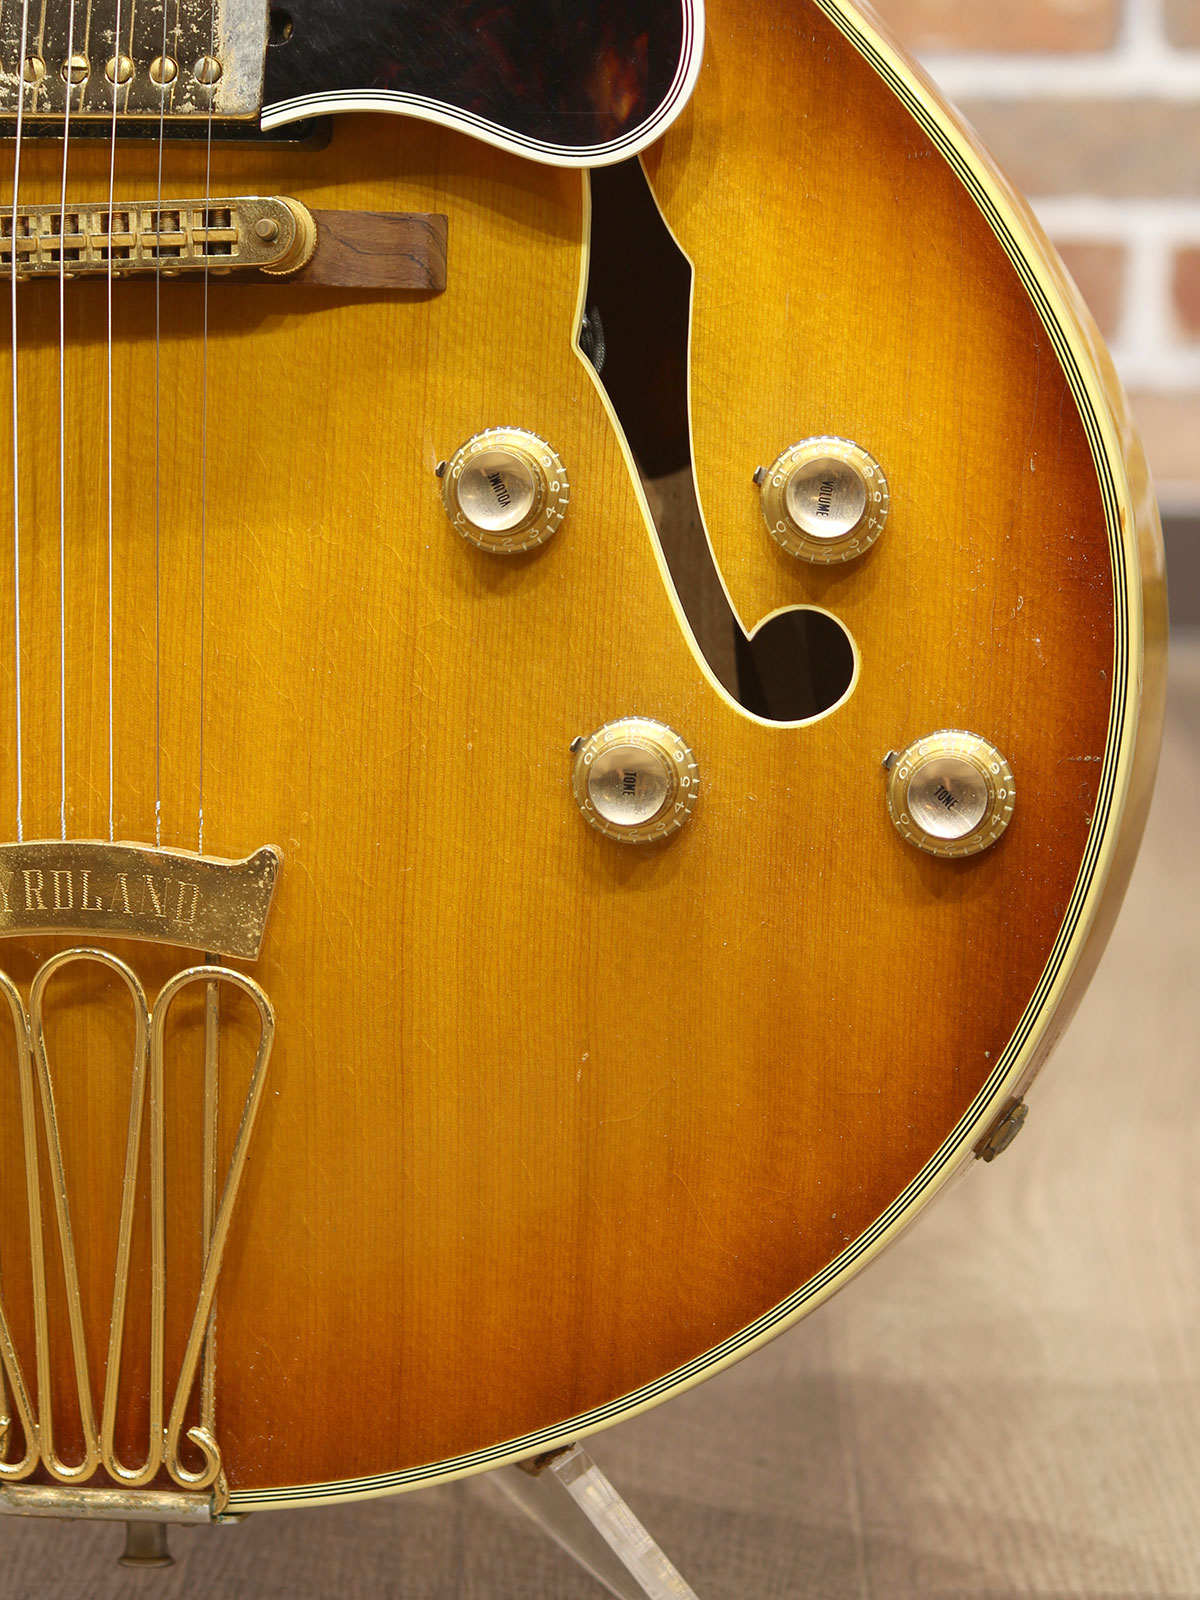 Gibson 1962-63 Byrdland ” owned by Jim Messina” - 21.jpg